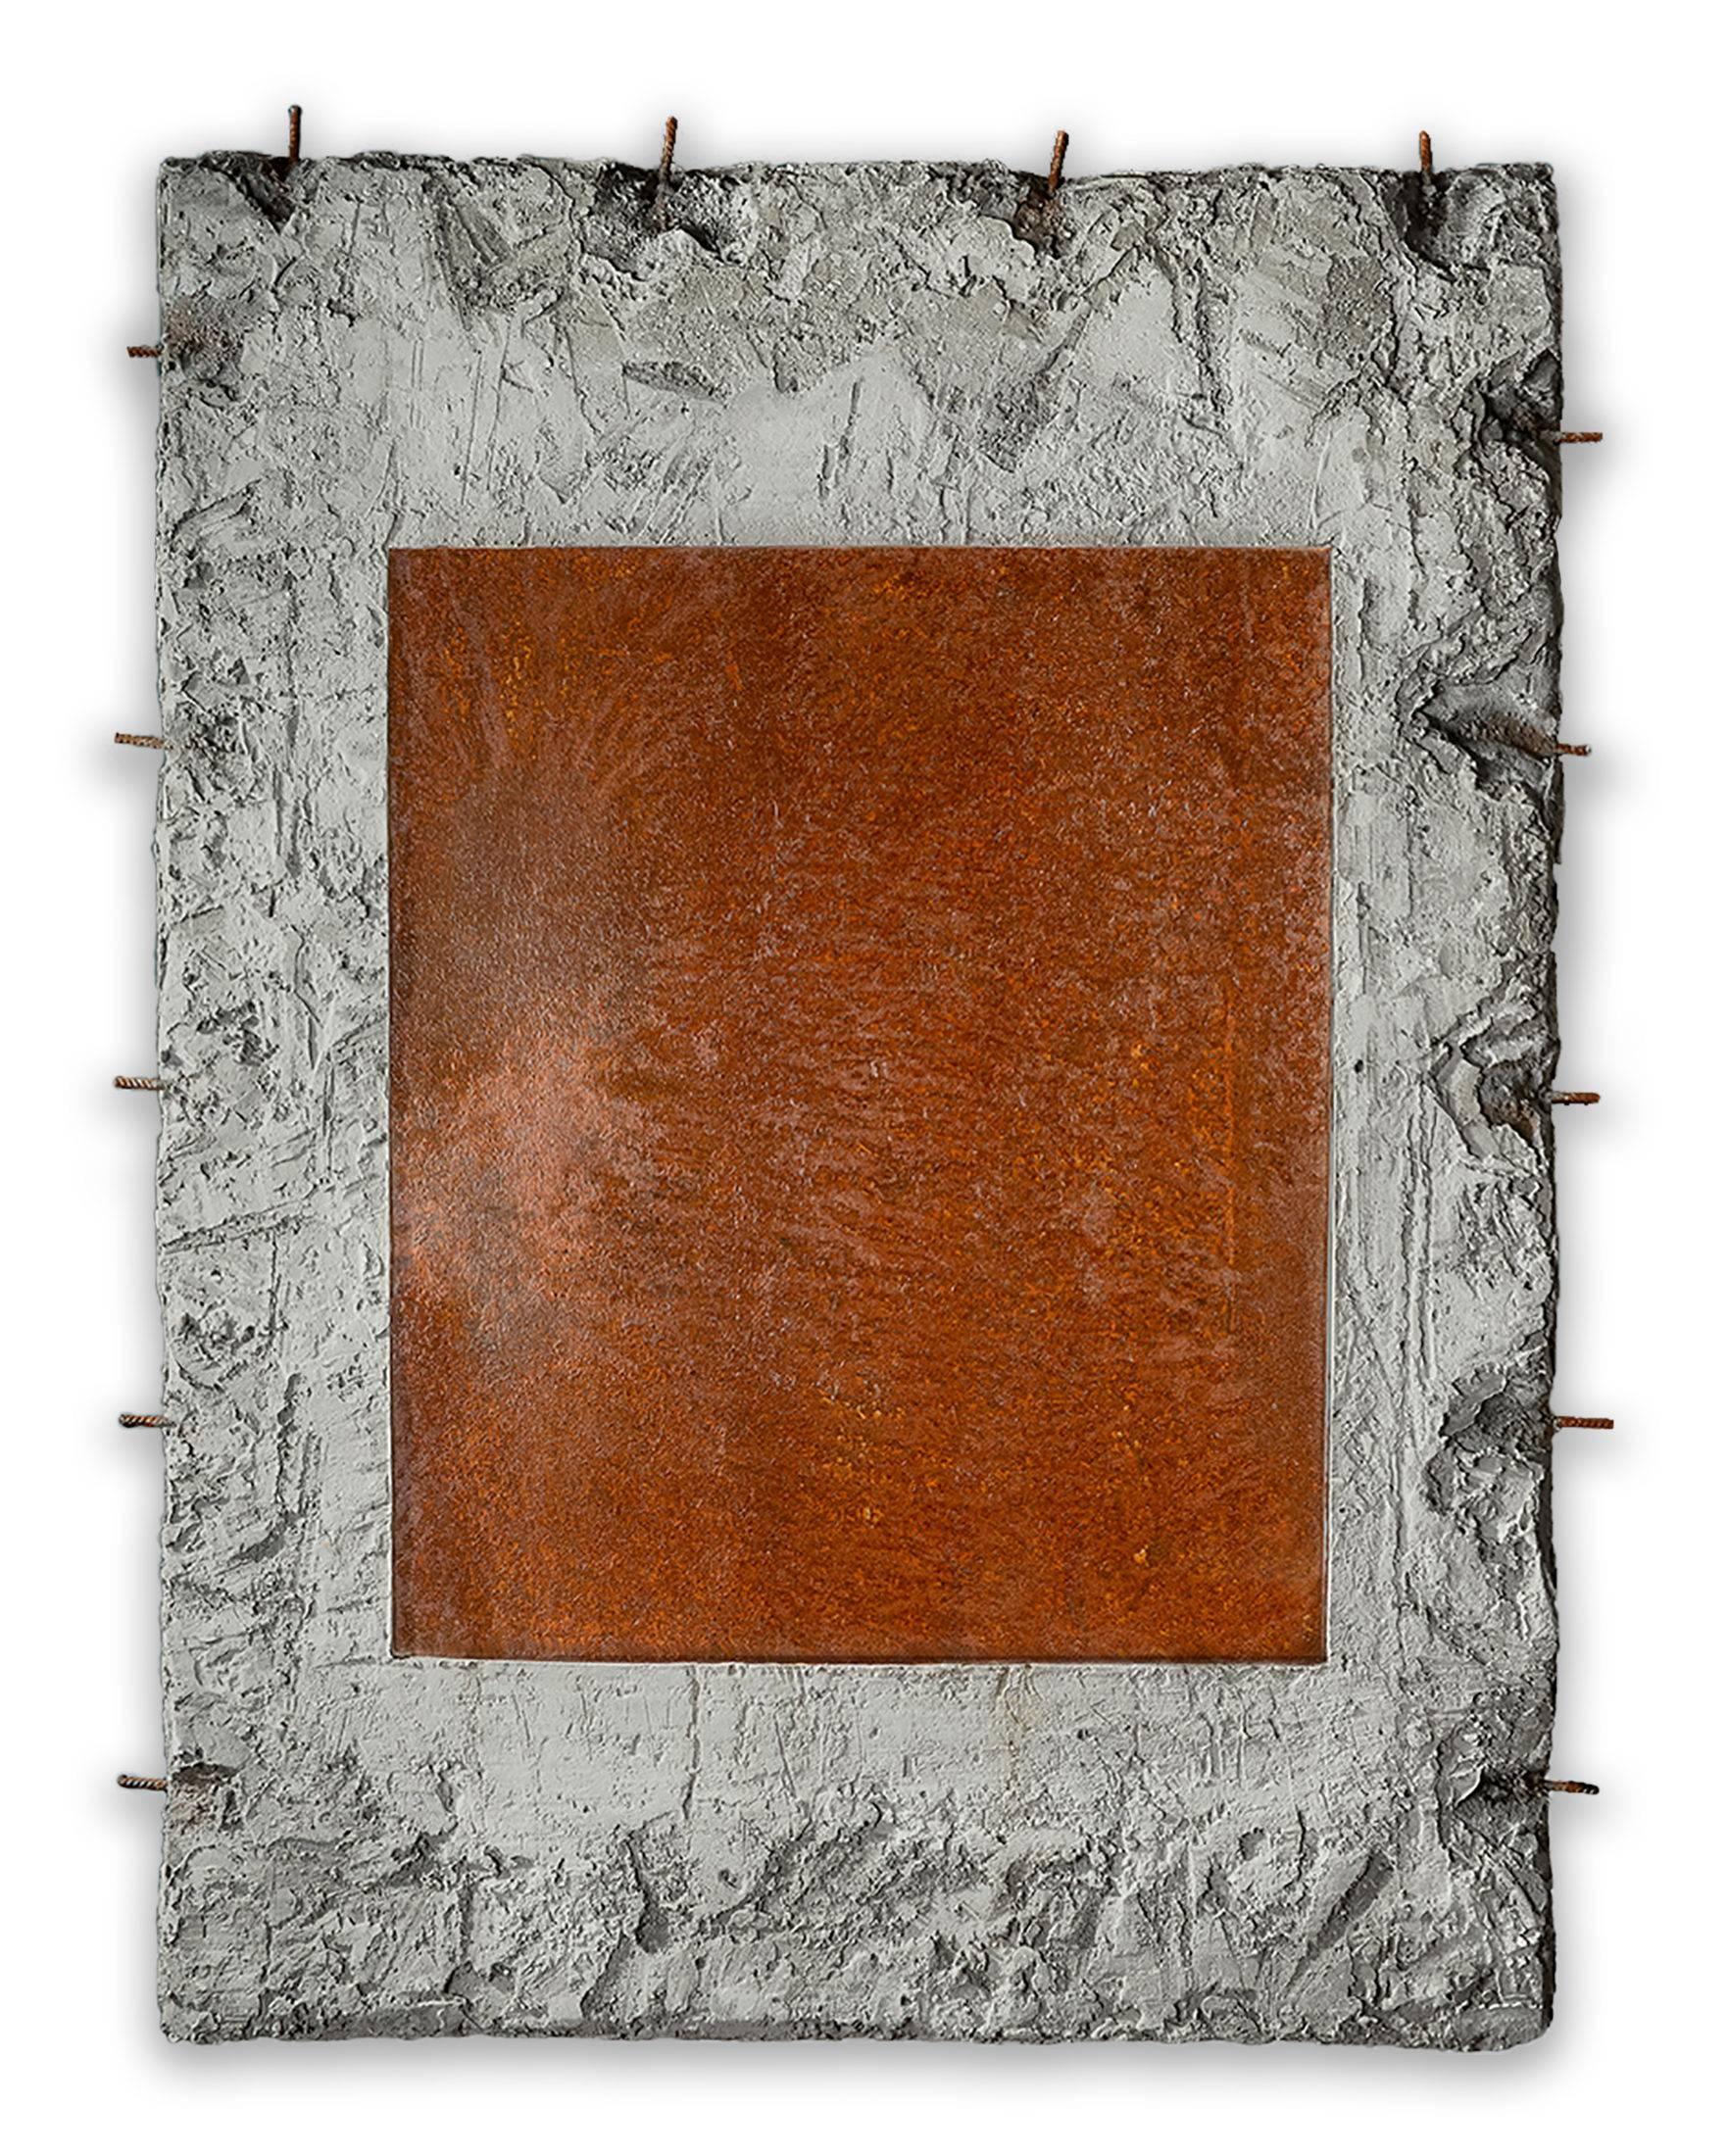 Still Steel (Abstract painting) - Mixed Media Art by Pierre Auville